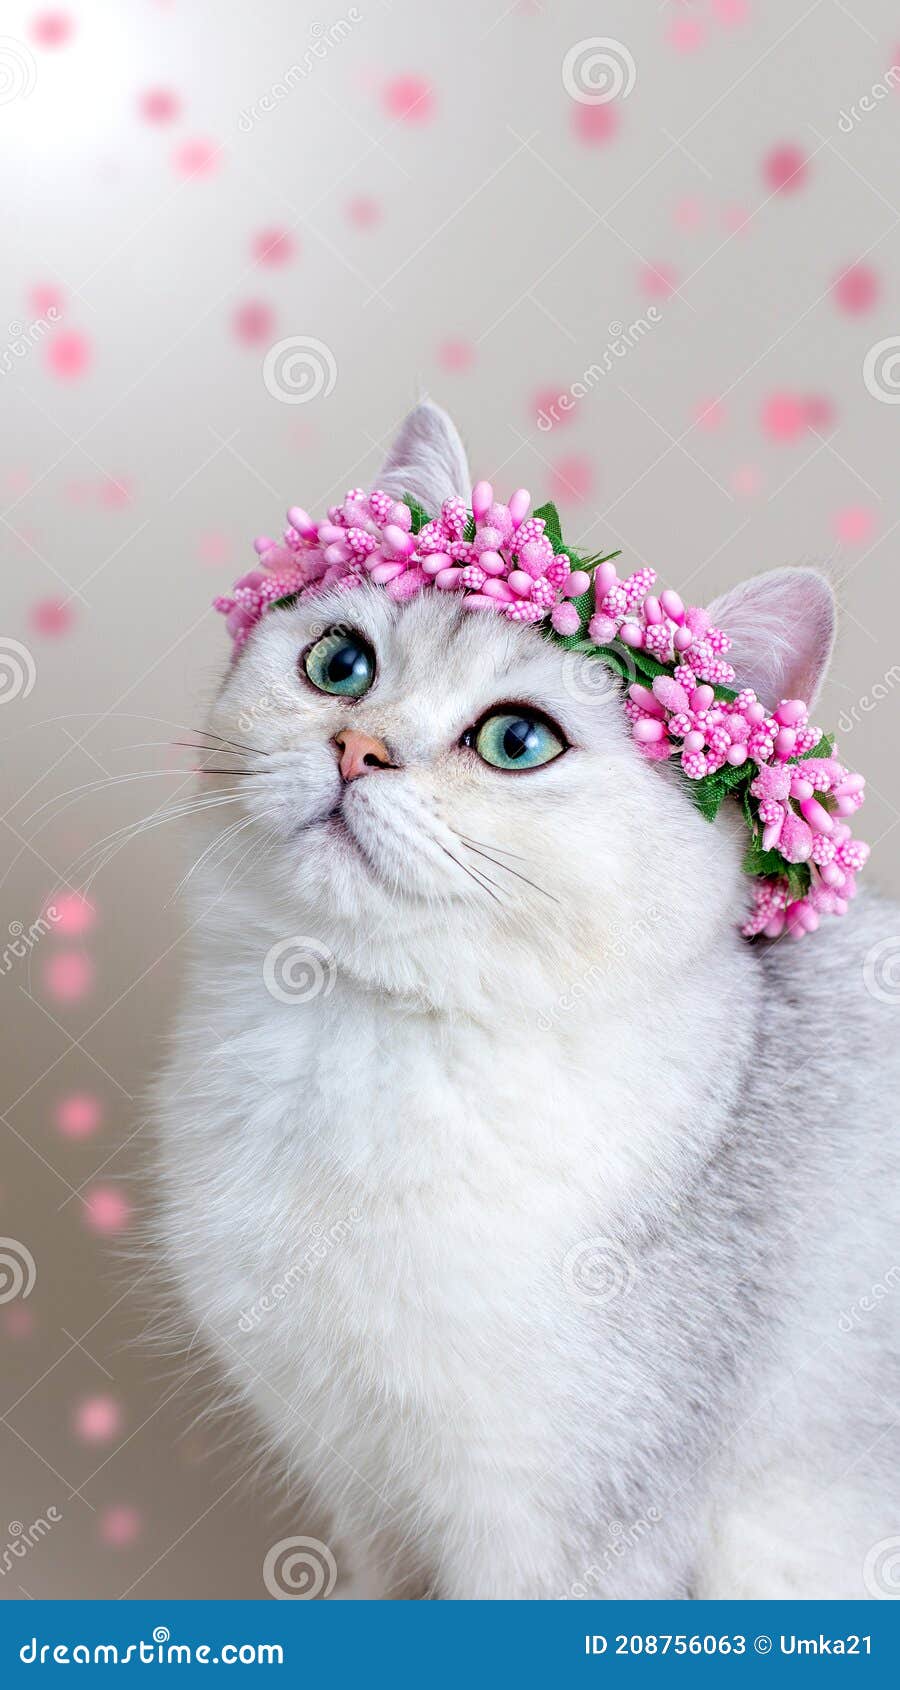 Portrait of a Charming Gray Cat Wearing a Crown of Pink Flowers ...